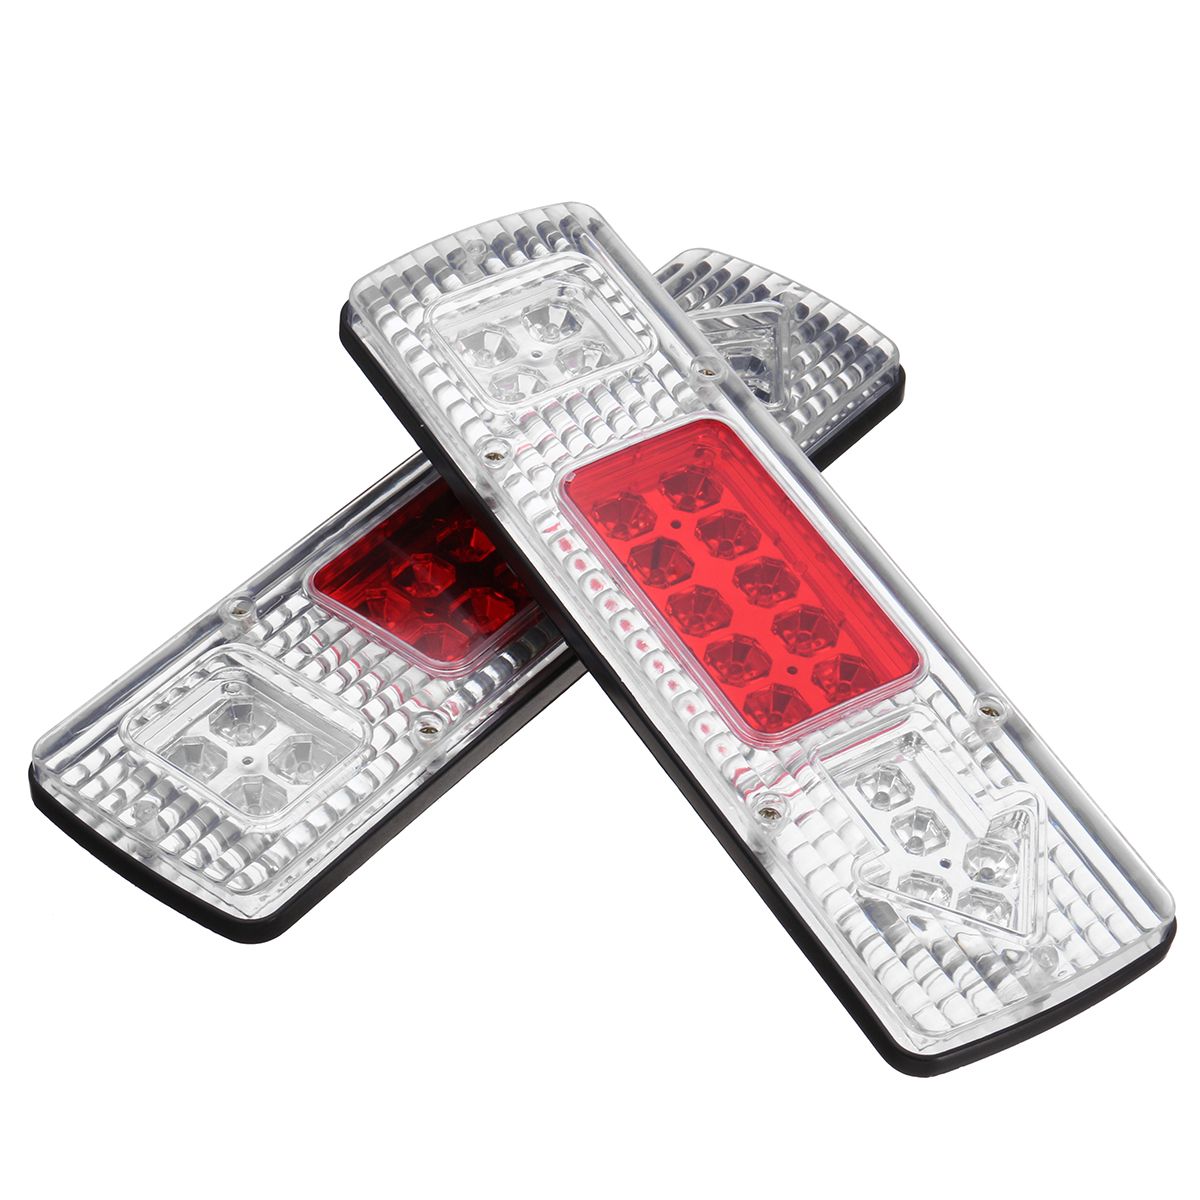 Pair-12V-05A-19LED-Car-Tail-Light-Stop-Indicator-Lamp-for-Trailers-Trucks-Lorries-1316107